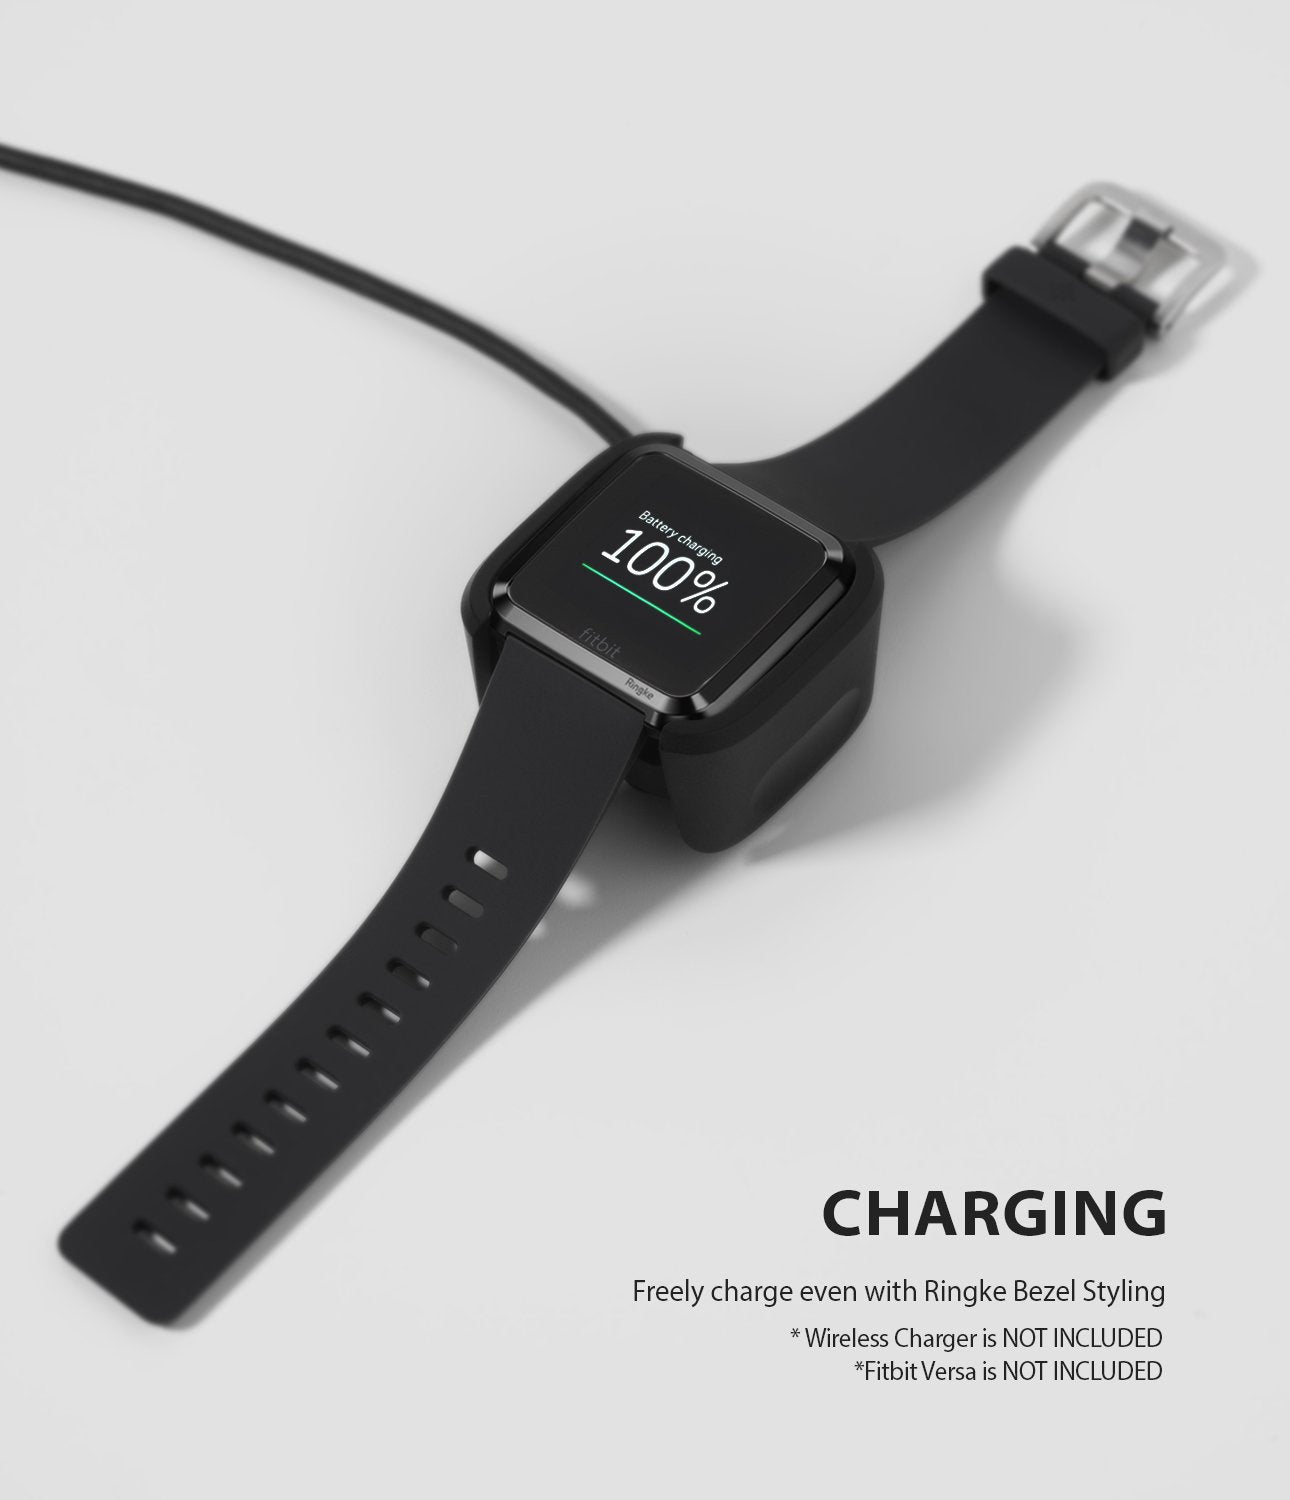 Ringke Bezel Styling Designed for Fitbit Versa Case Cover, Black- FW-V-03, wireless charger compatible